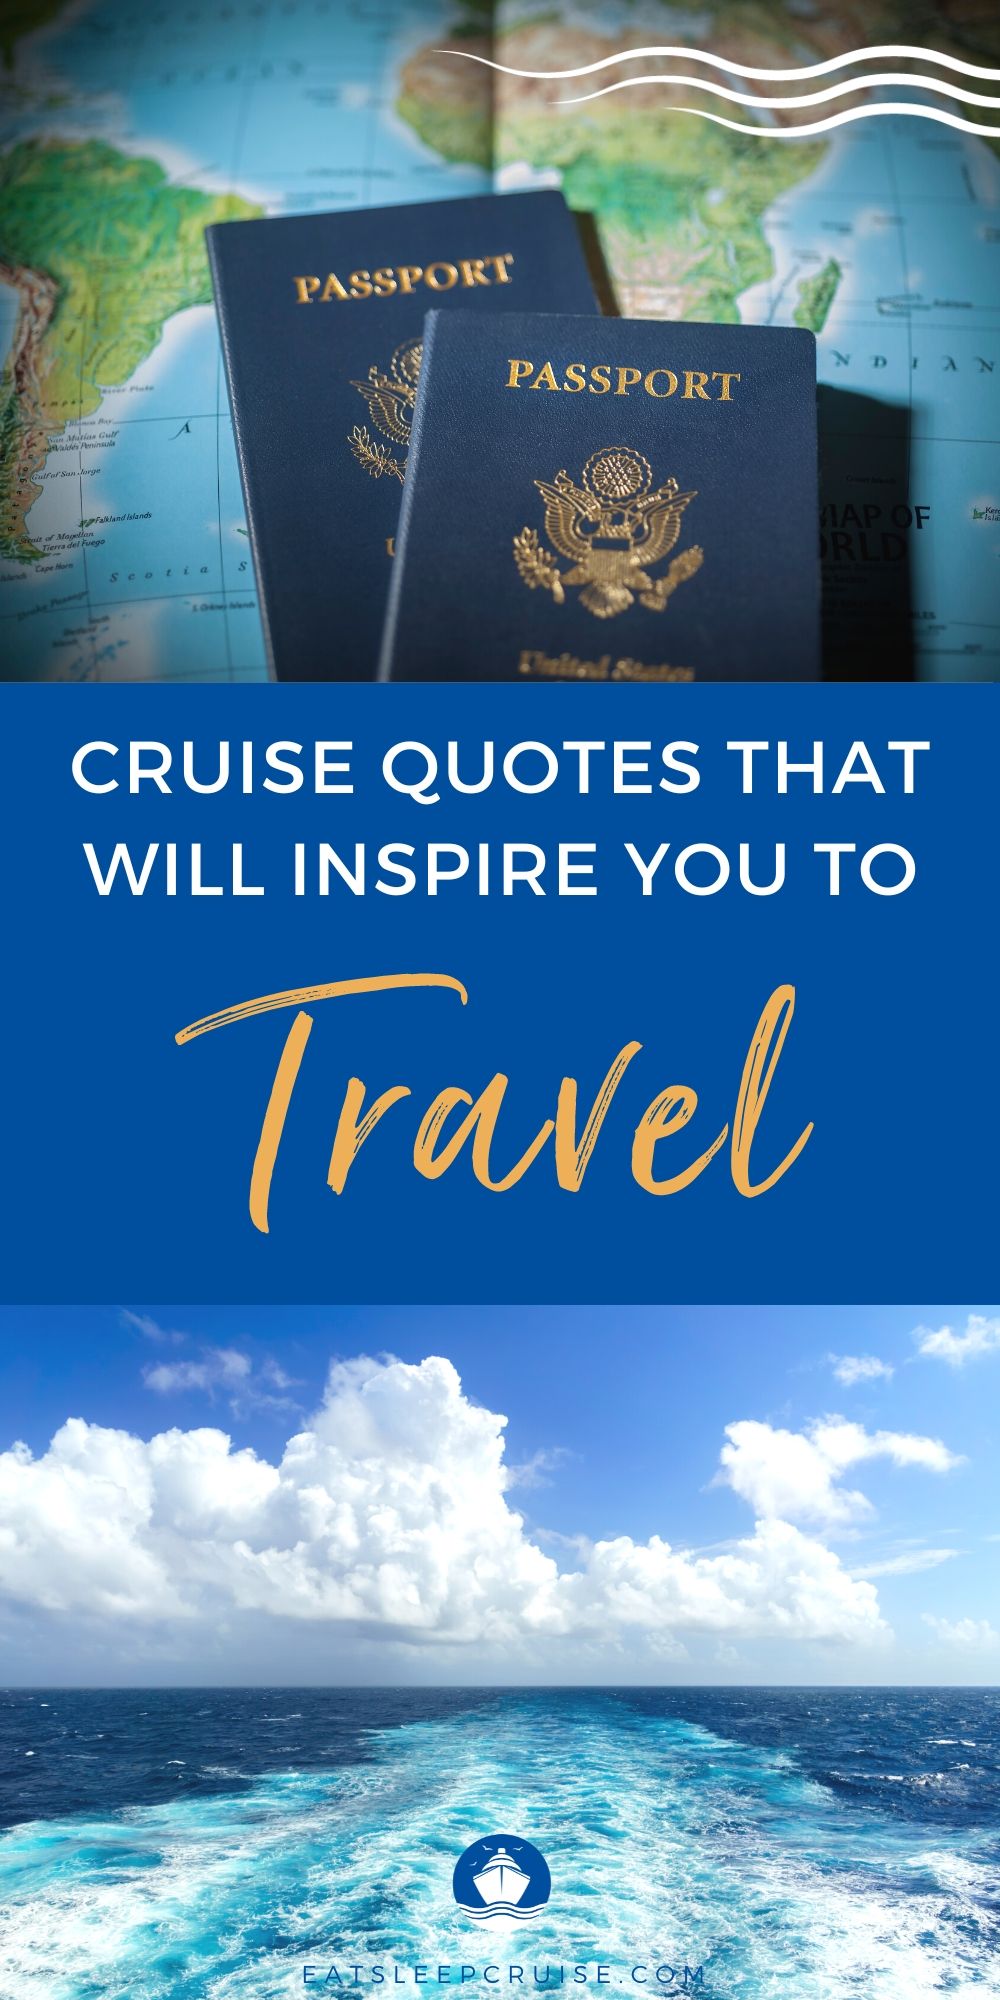 15 Cruise Quotes That Will Inspire You to Trave